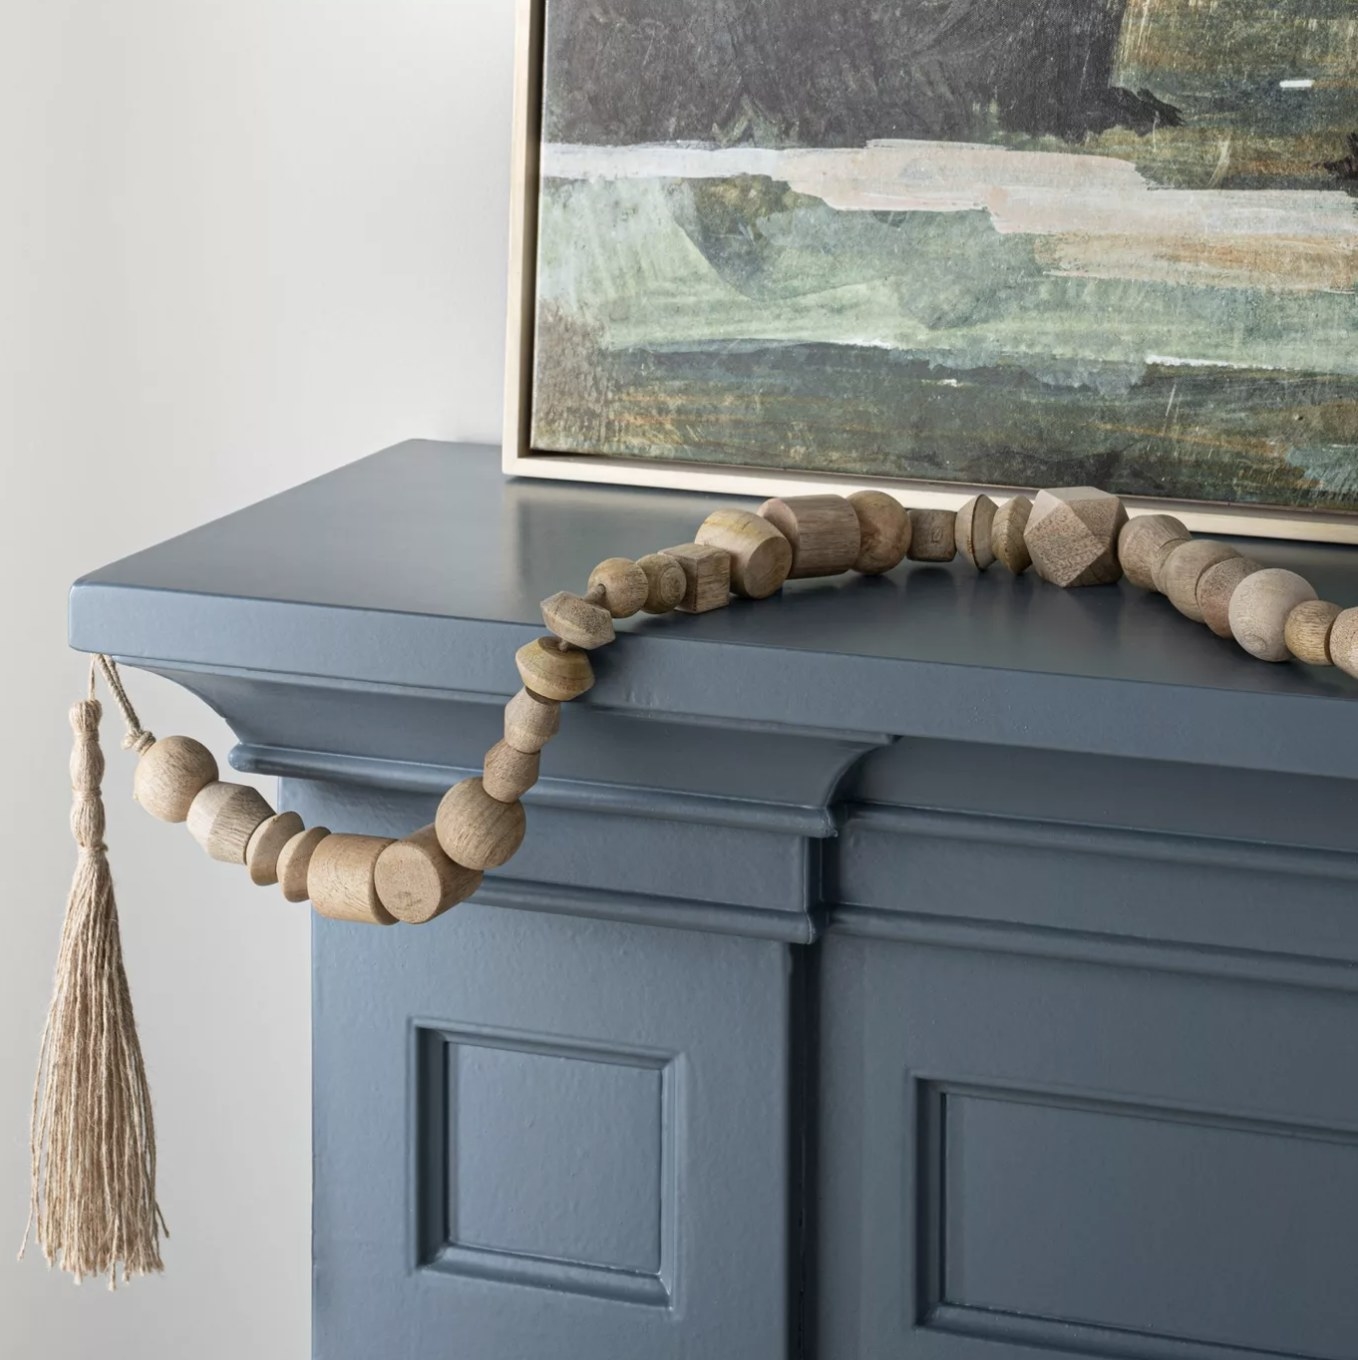 The garland draped over a blue hearth